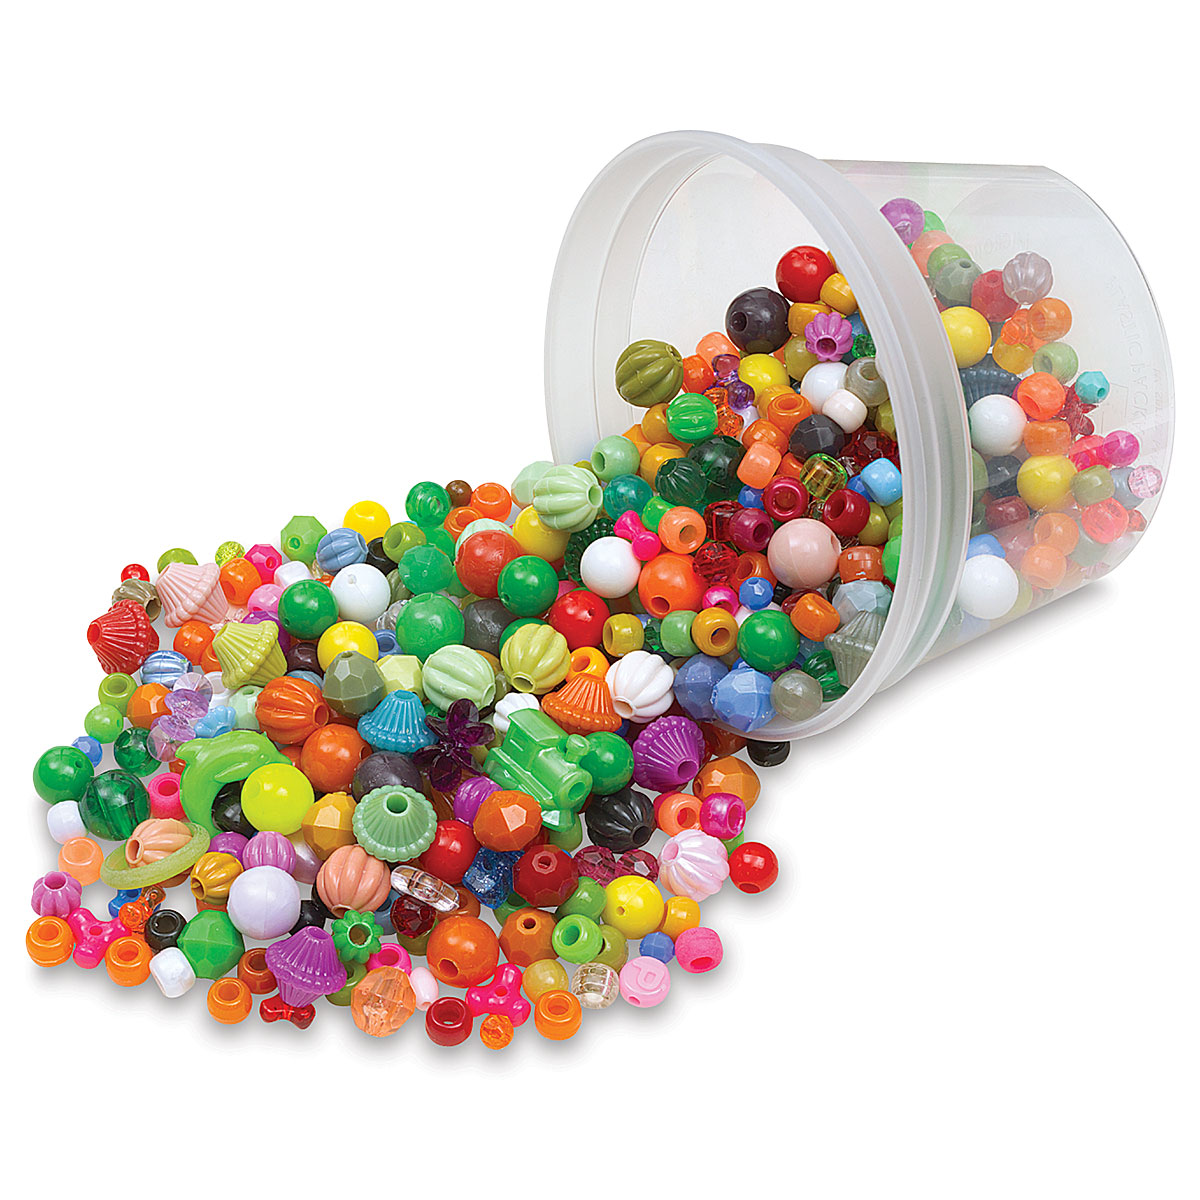 ABC Beads Assorted Colors  Craft and Classroom Supplies by Hygloss